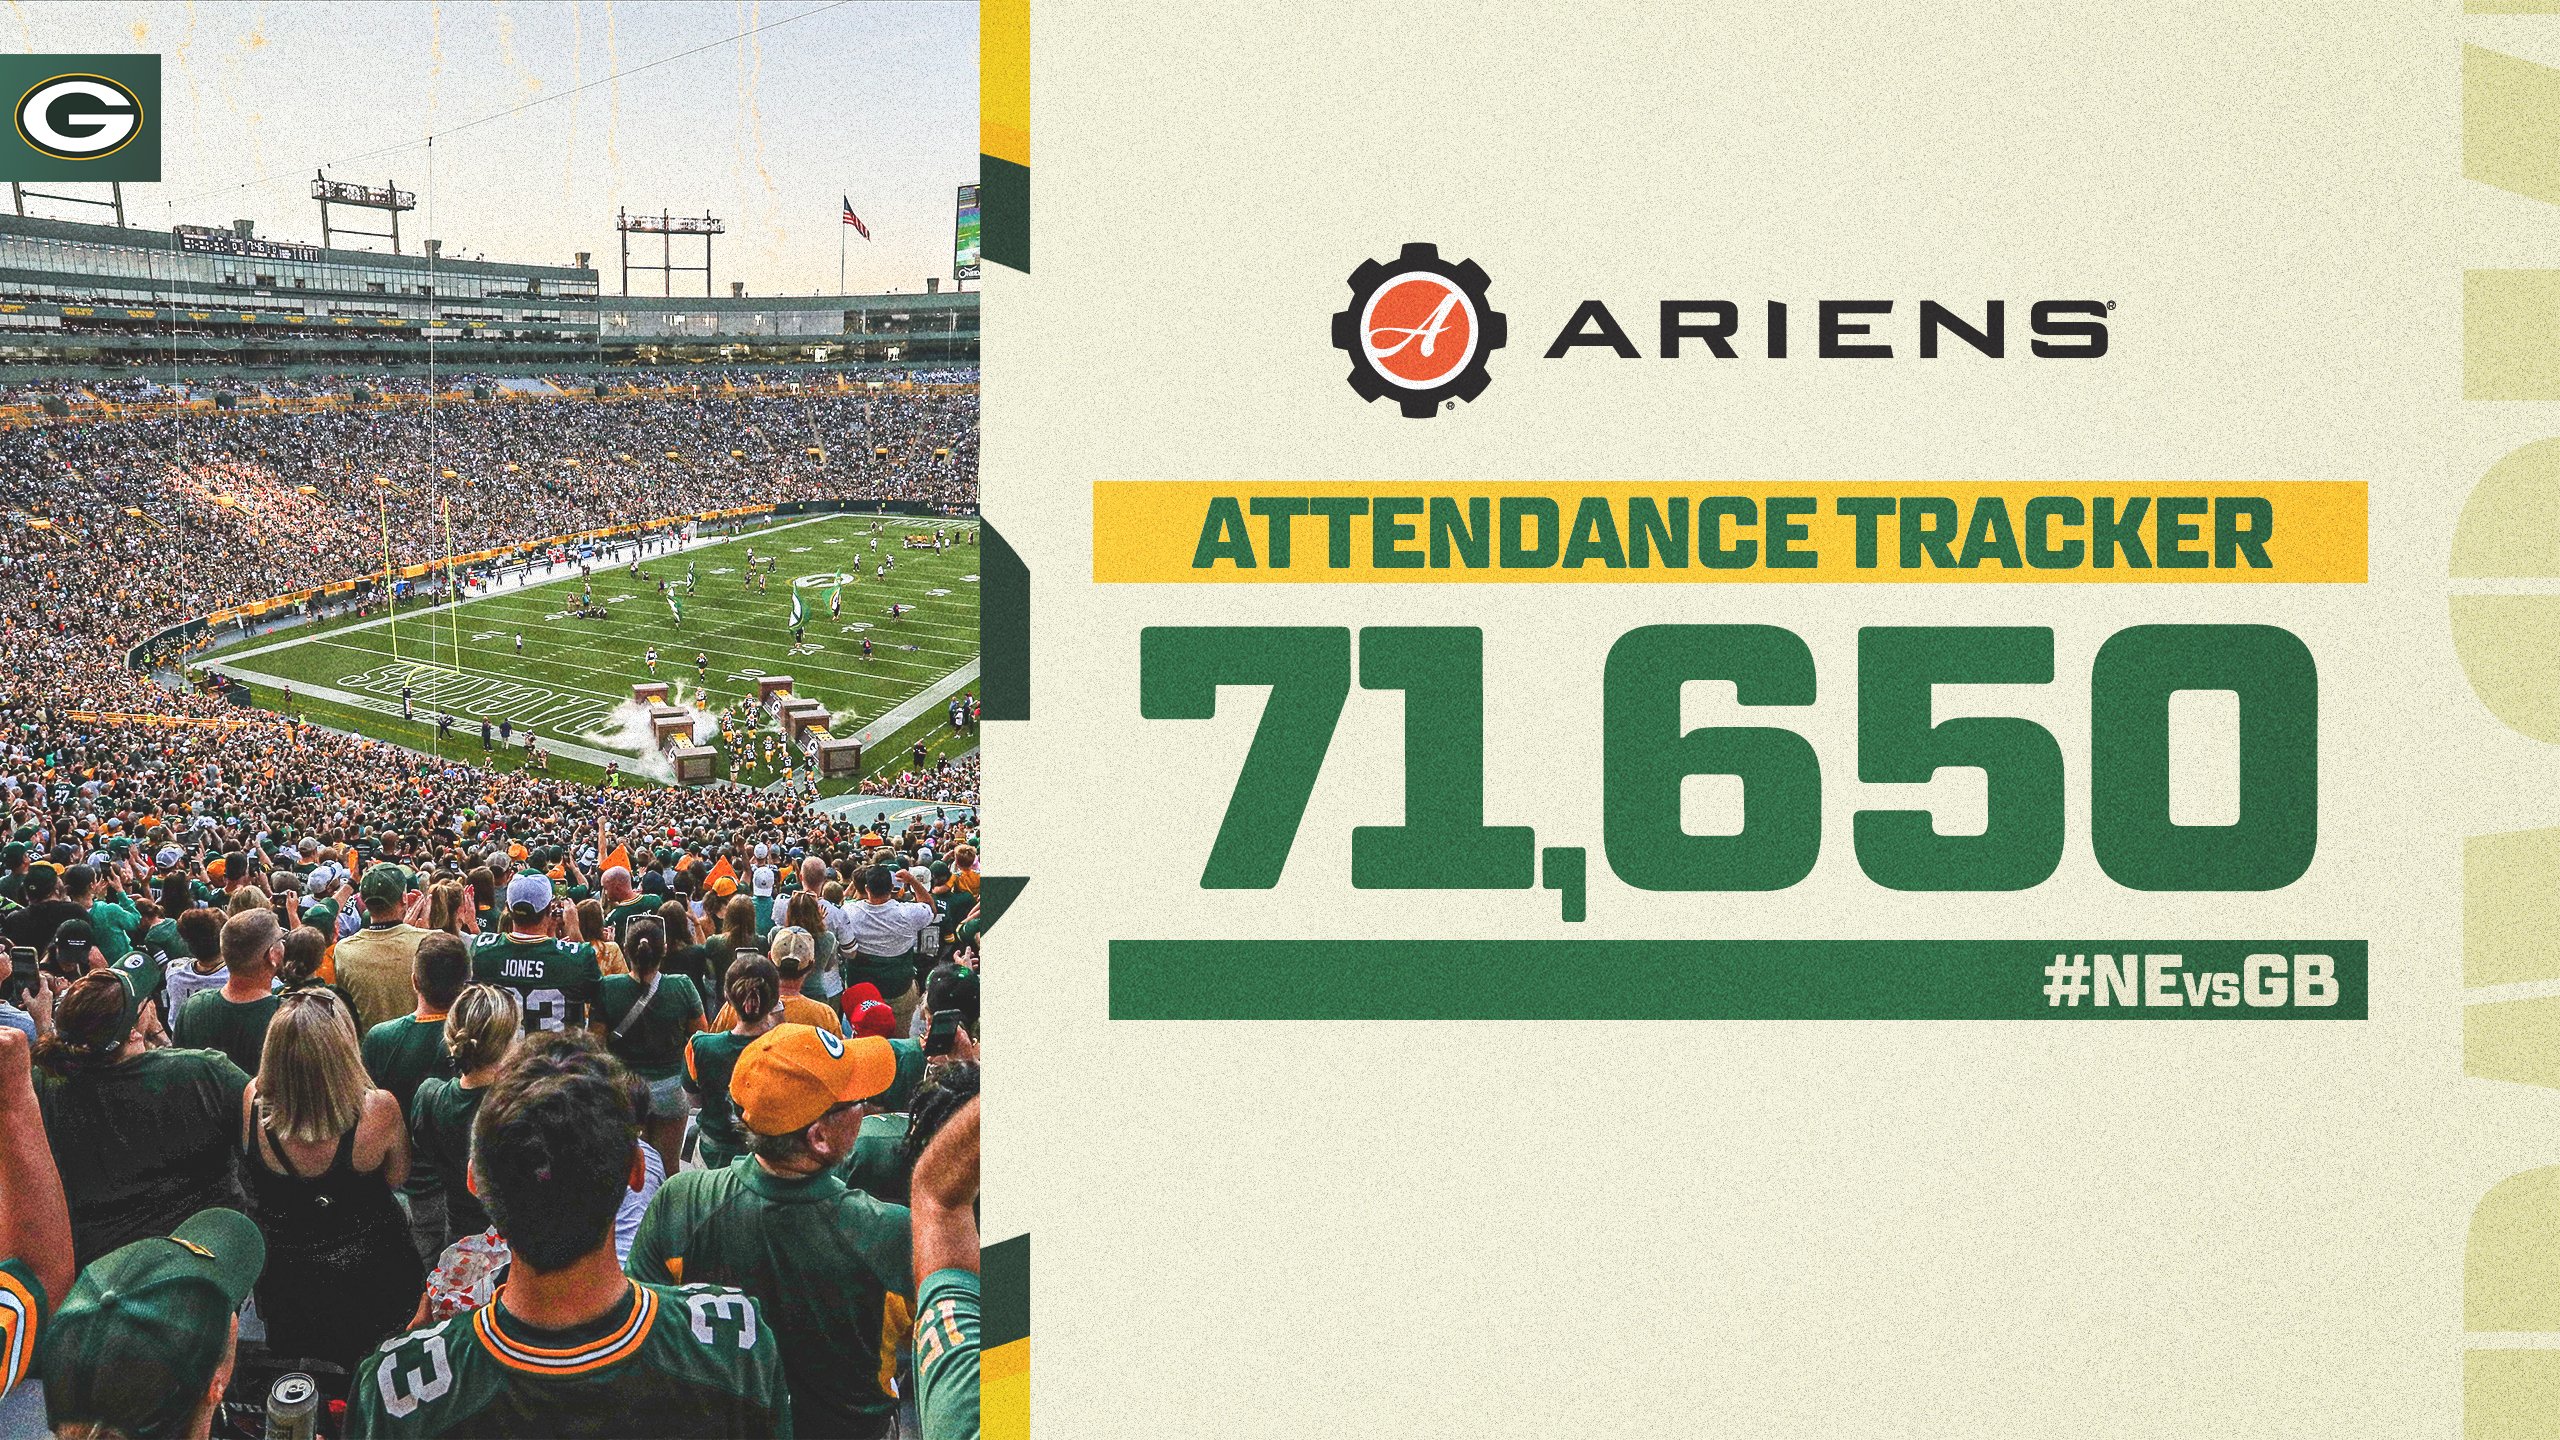 Green Bay Packers home attendance 2022